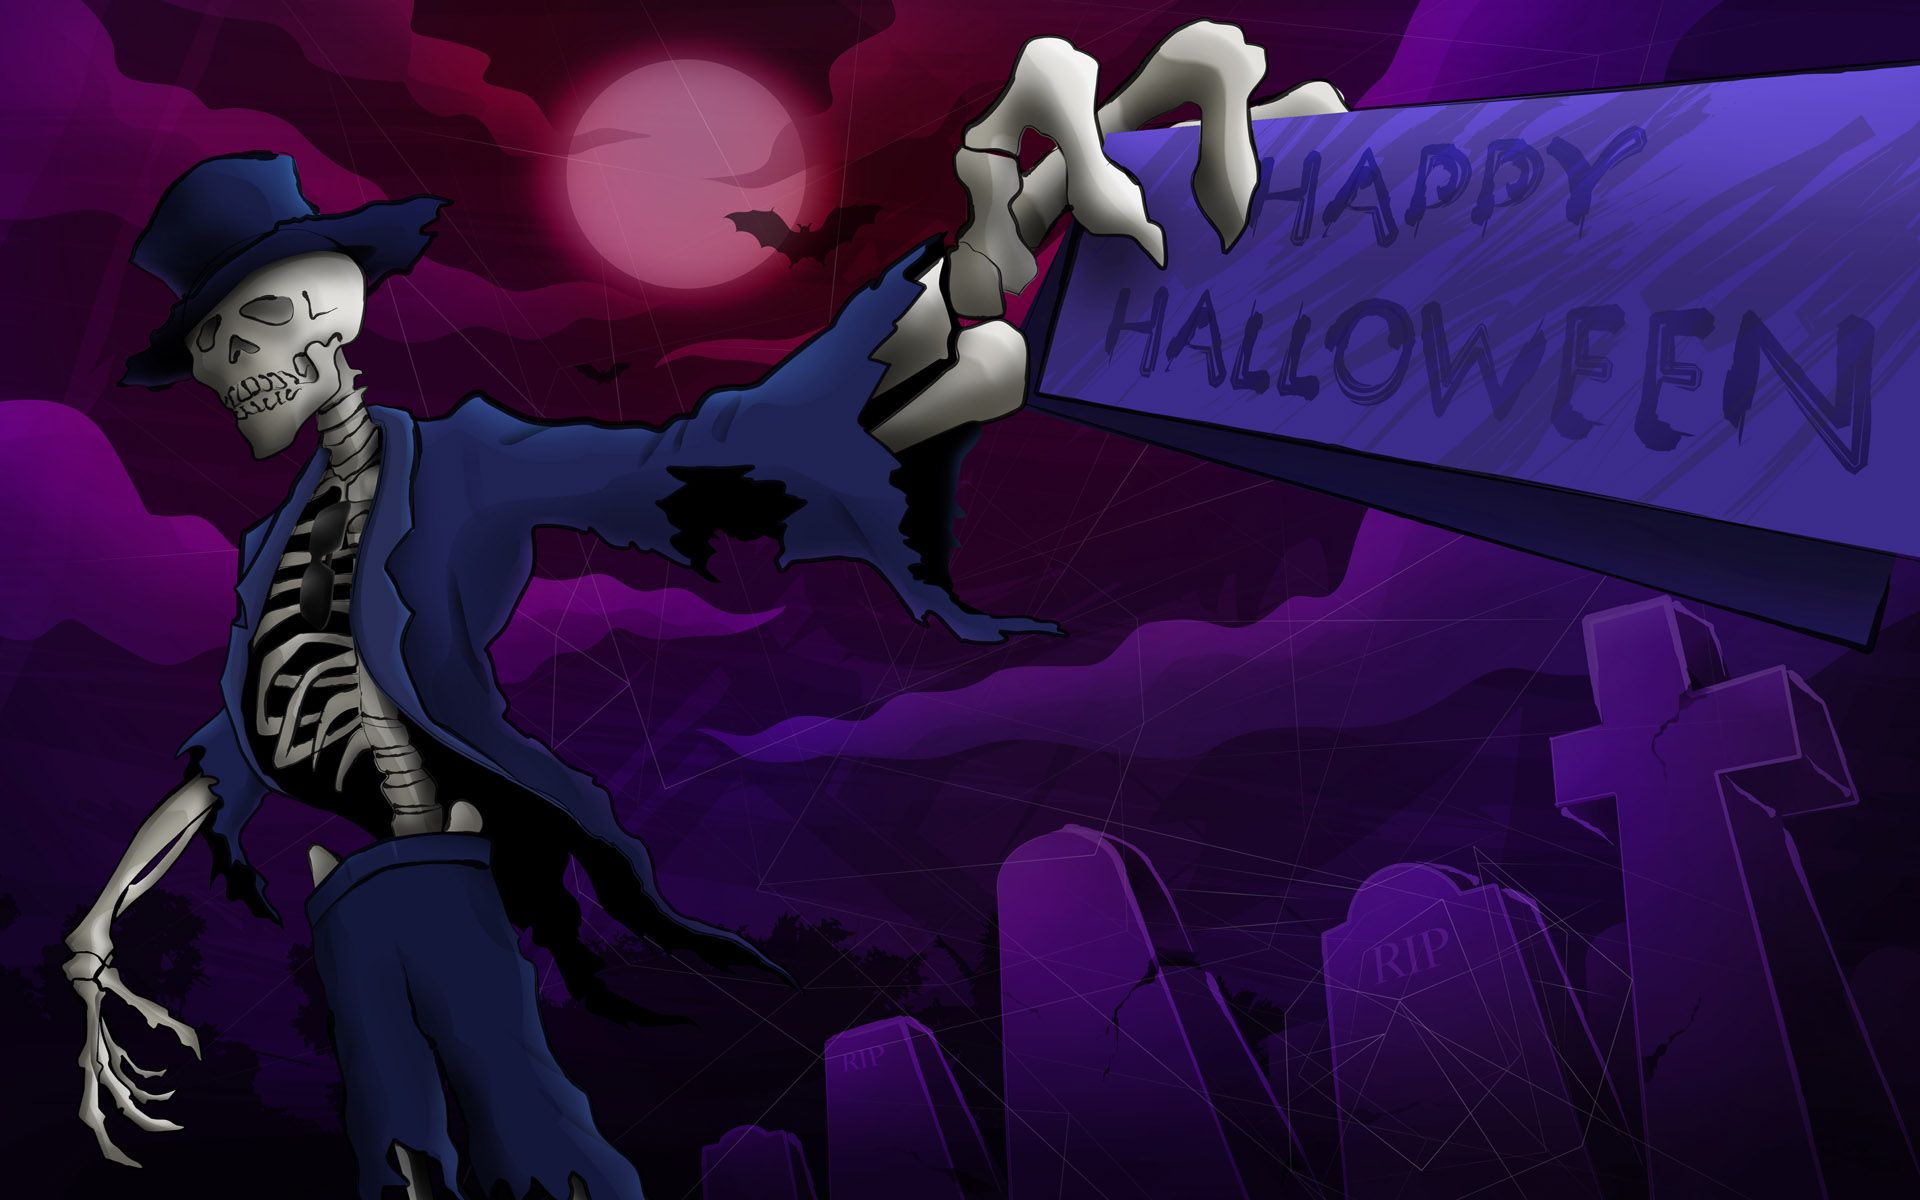 Purple Halloween Background HD for PC